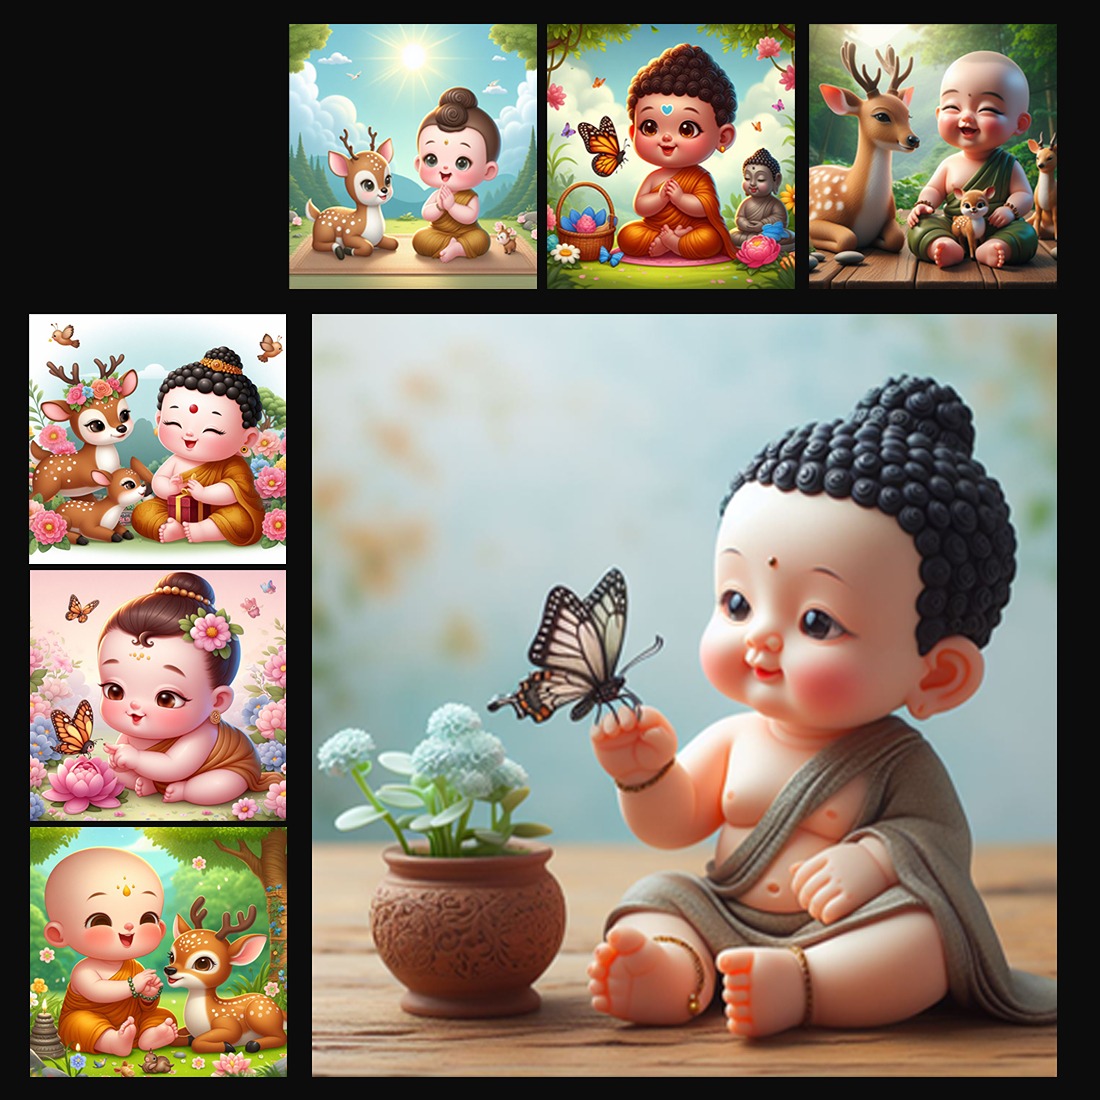 Cute Buddha Baby images preview image.